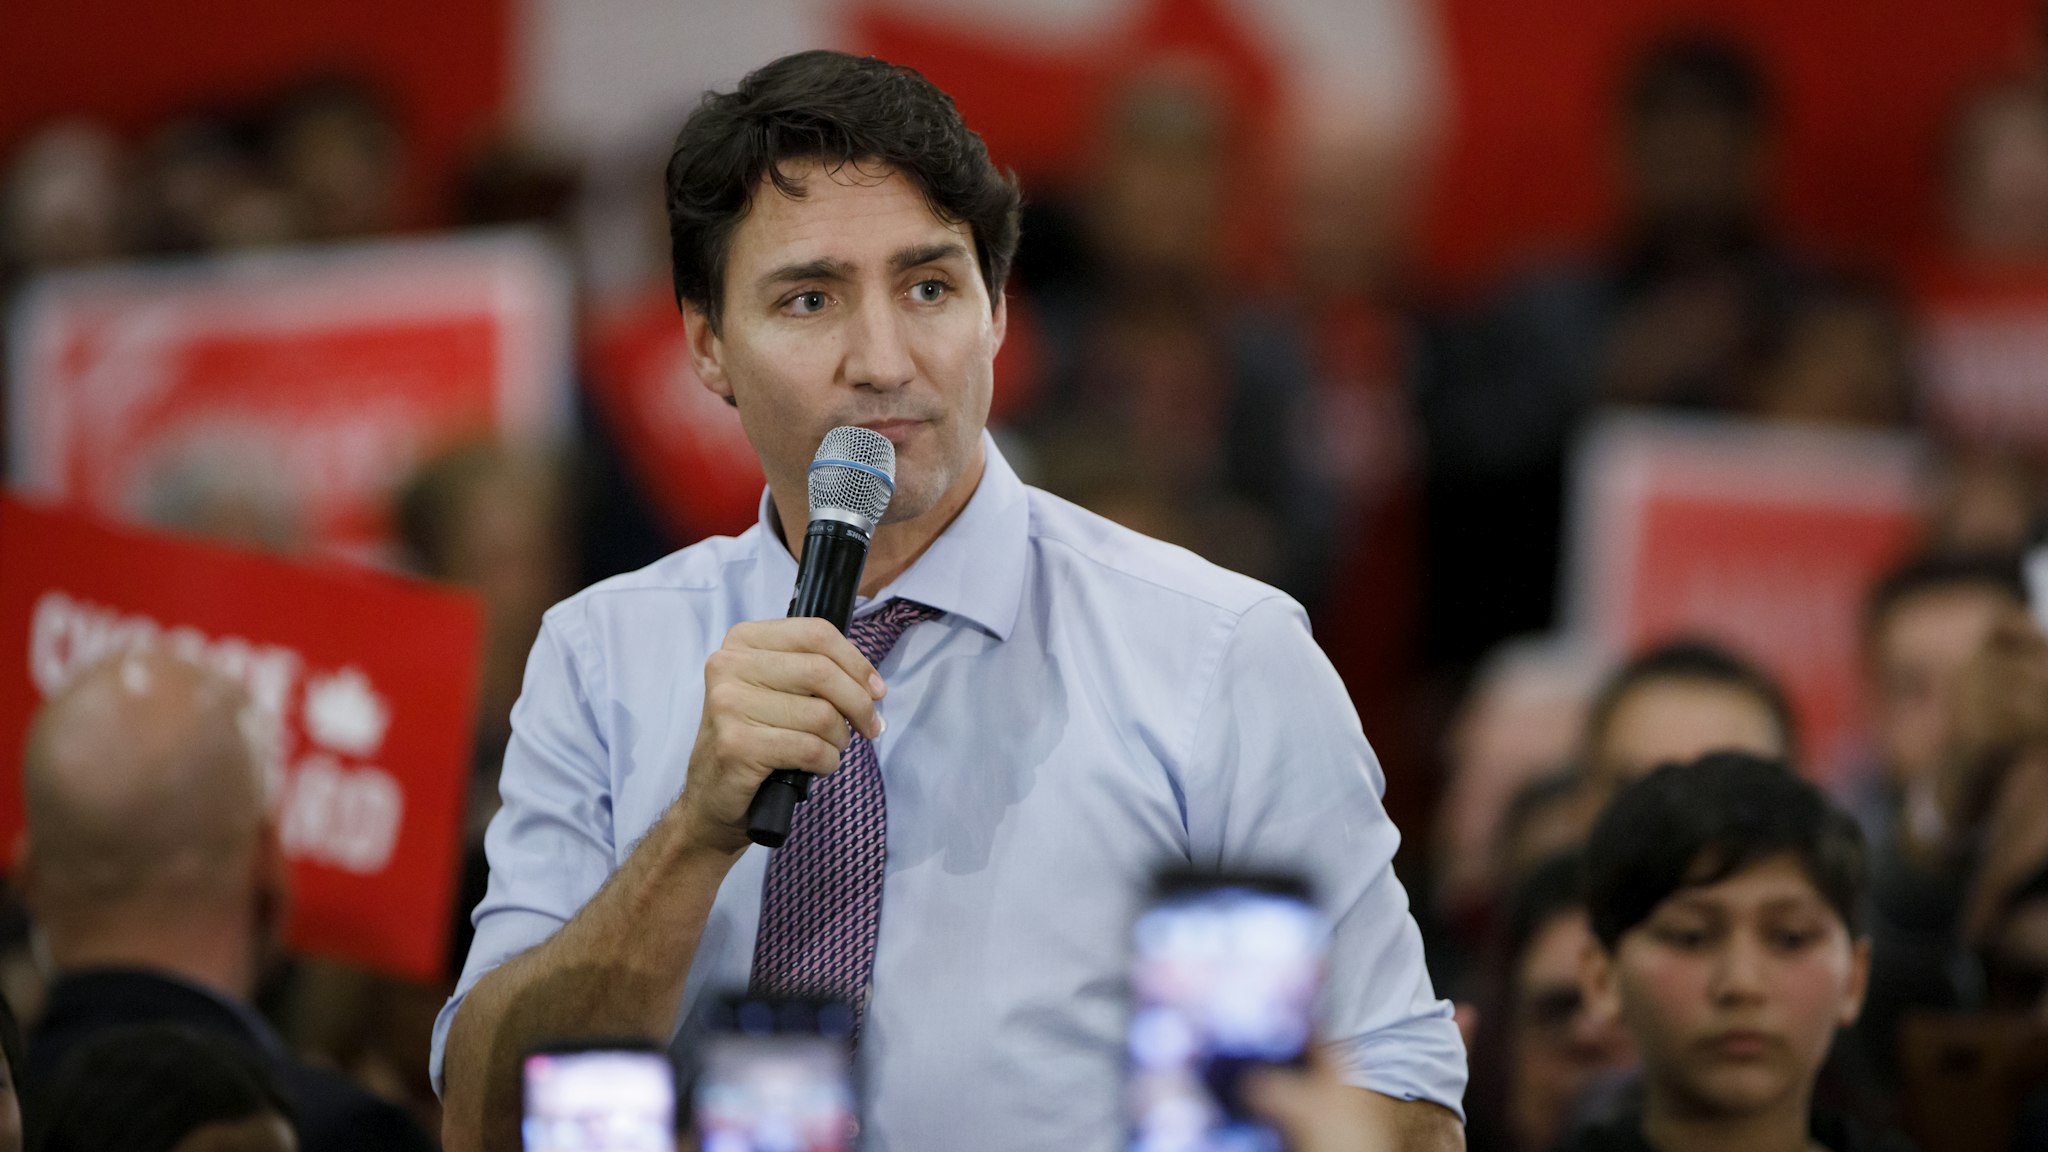 VAUGHAN, ON - OCTOBER 18: Liberal Leader and Canadian Prime Minister Justin Trudeau speaks to a room of supporters as he takes part in a campaign rally ahead the federal election, on October 18, 2019 in Vaughan, Canada. Canada will hold elections on October 21. (Photo by Cole Burston/Getty Images)